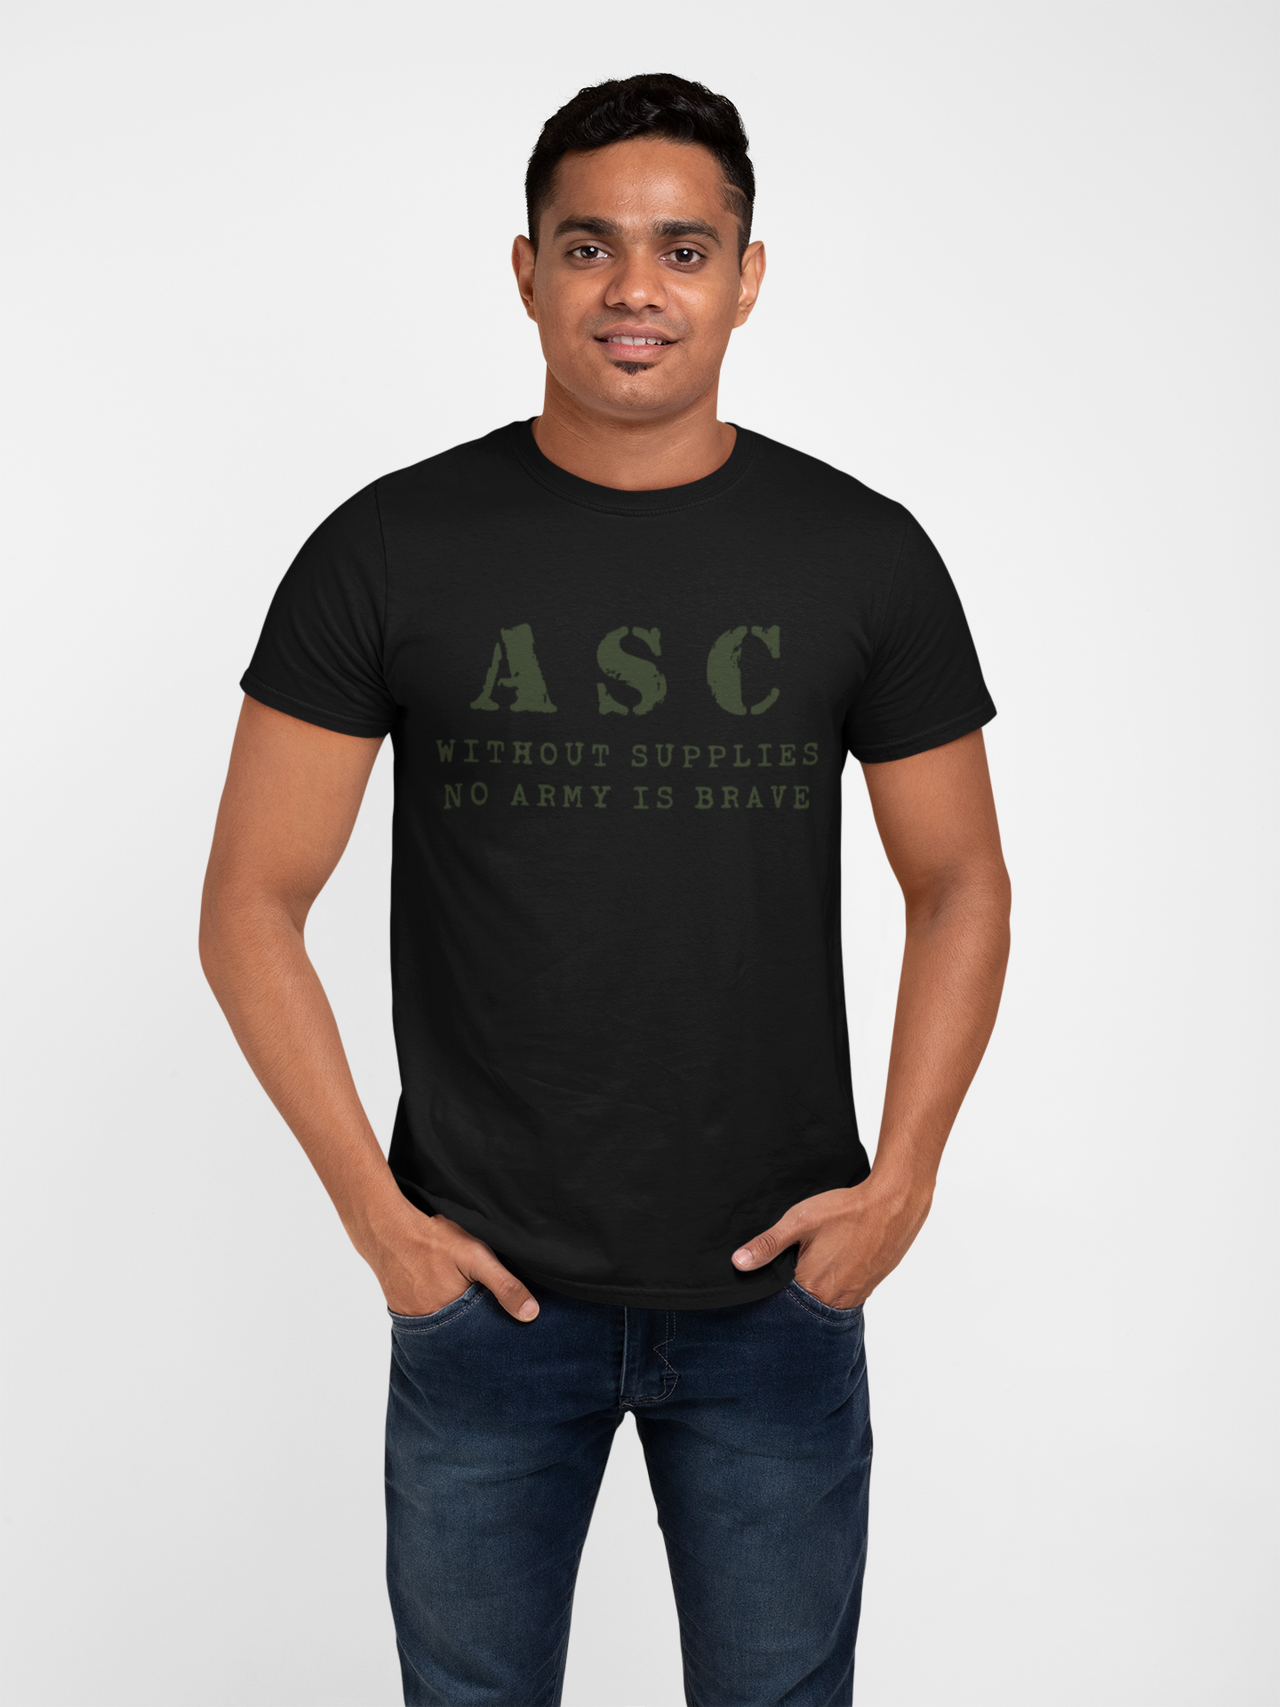 ASC T-shirt - ASC, Without Supplies, No Army Is Brave (Men)